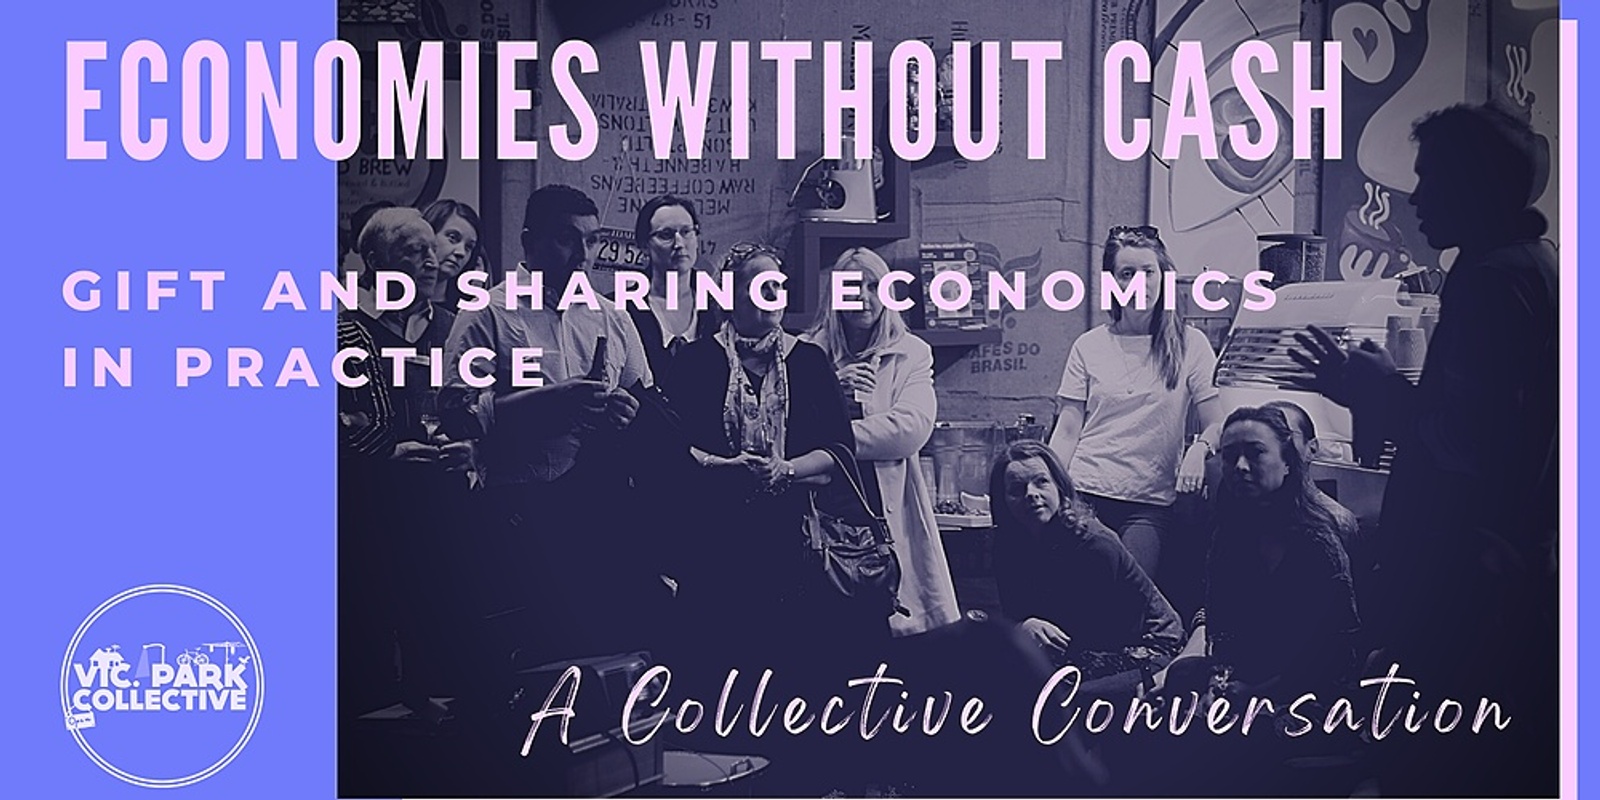 Banner image for Economies without cash - gift & sharing economics in practice